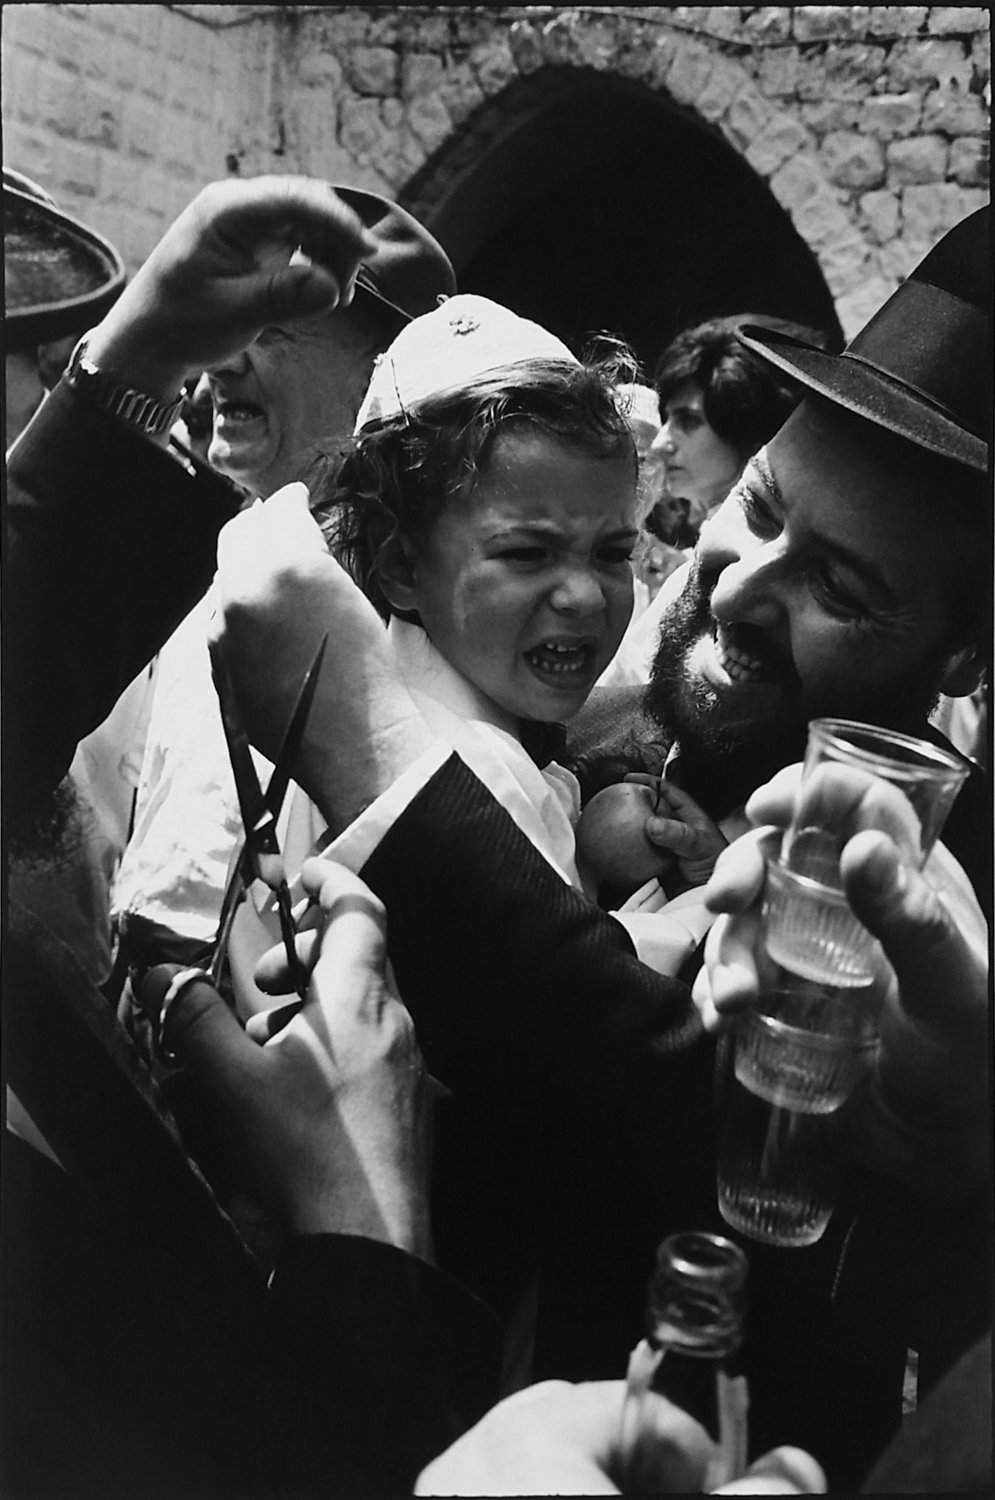 Leonard Freed’s 1967 photograph of the Jewish holiday Lag B’omer is included in the exhibition ‘Leonard Freed: Israel Magazine 1967-1968,’ on display at the Hebrew Home at Riverdale’s Derfner Judaica Museum through Jan. 5.